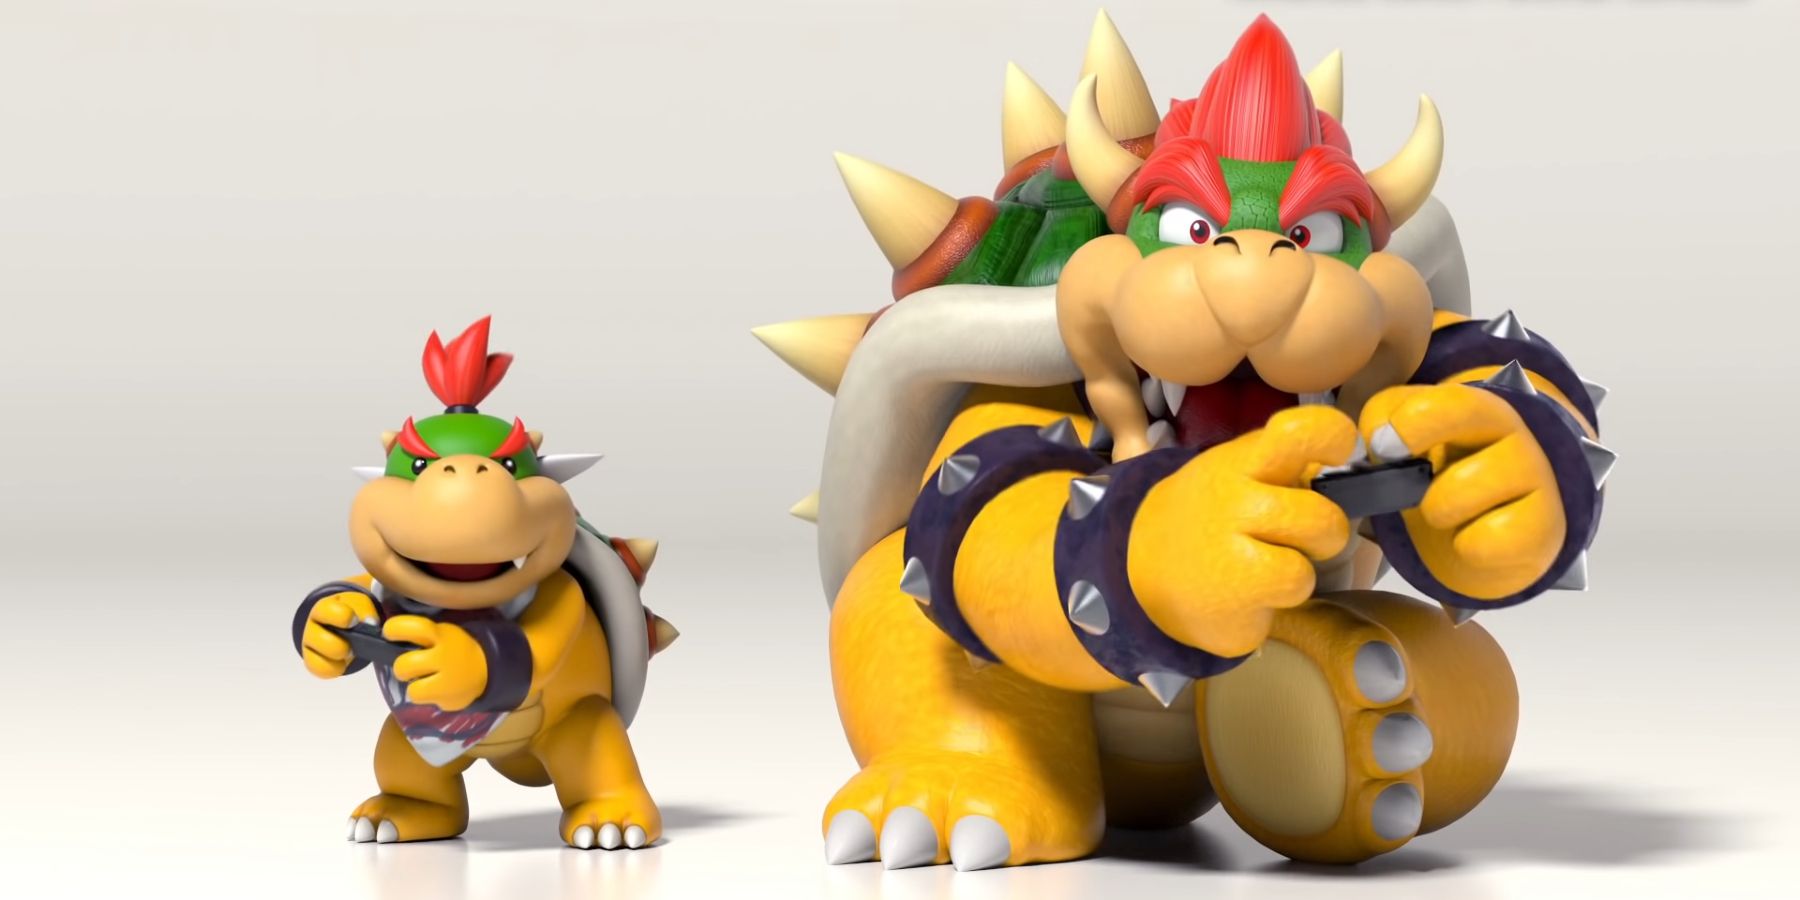 Bowser and Bowser Jr. playing together on the Nintendo Switch